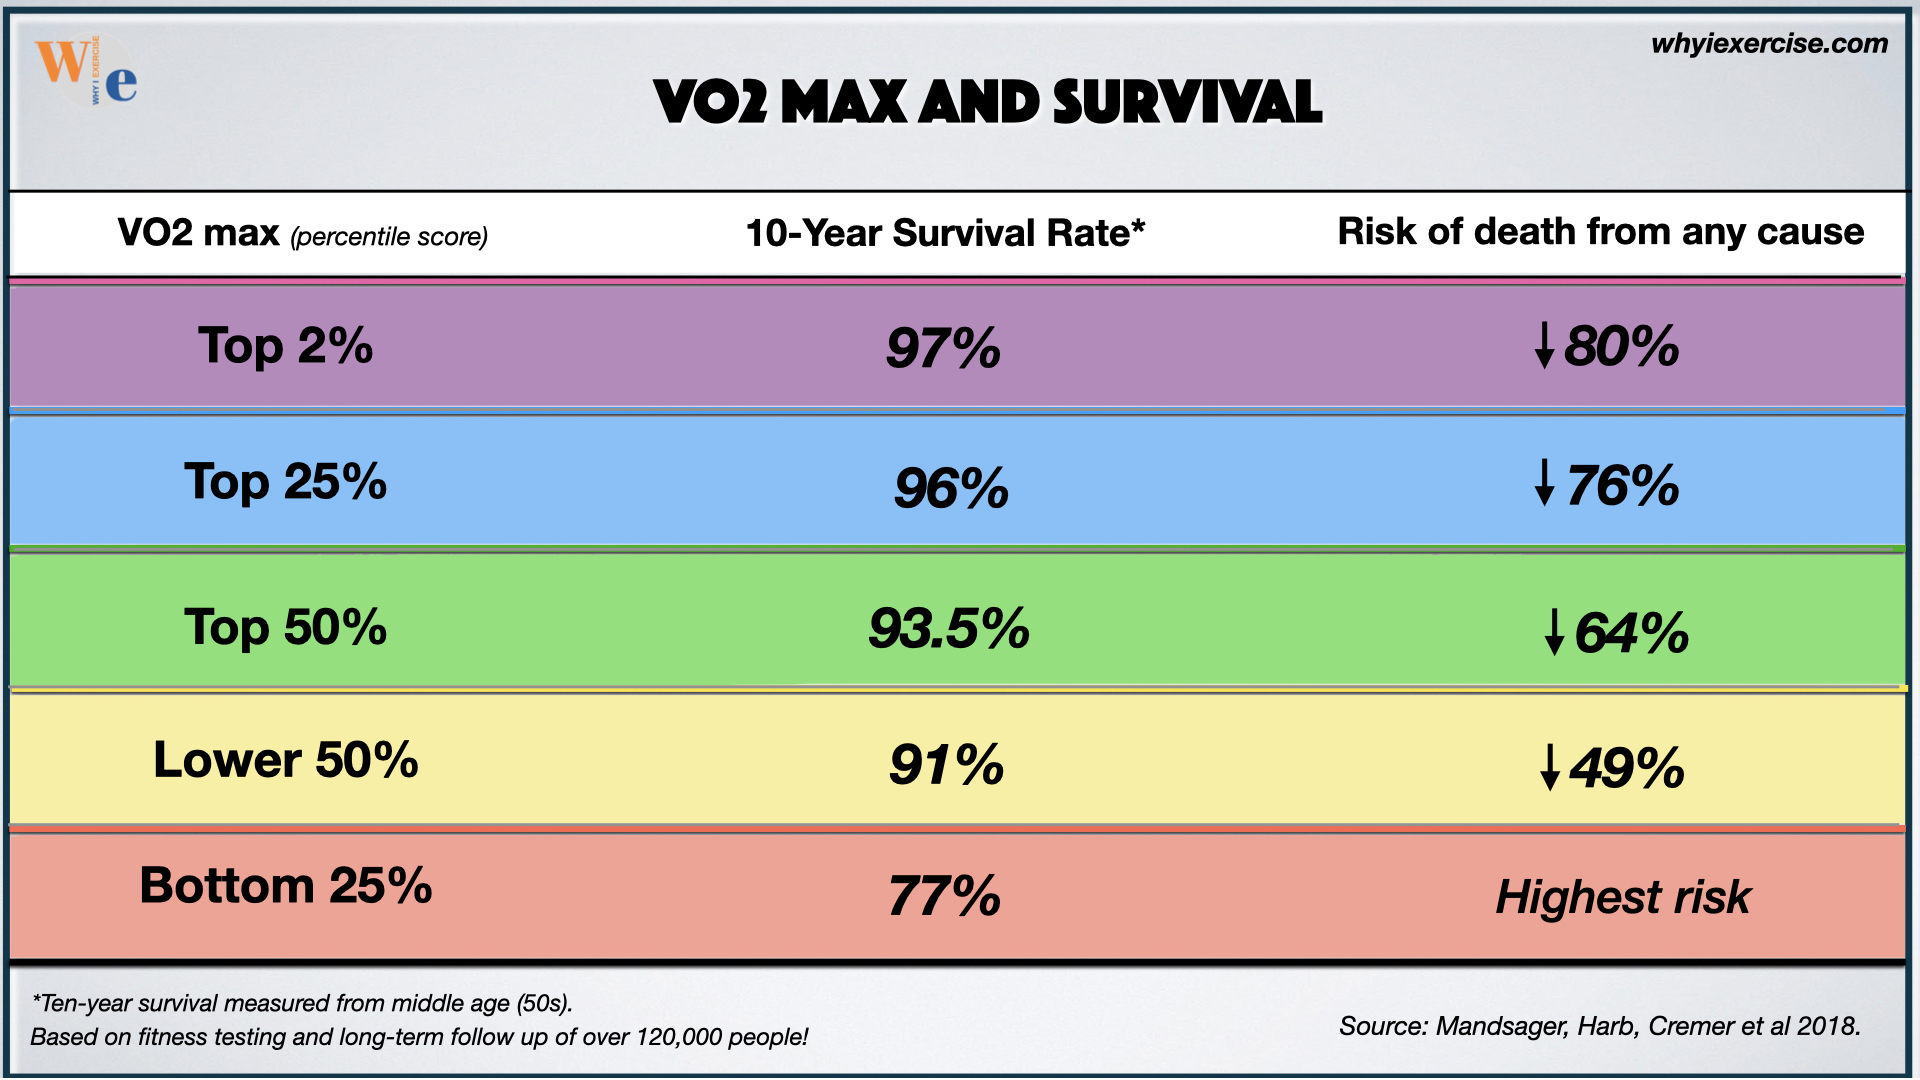 VO2 max, 10-year survival from middle age, risk of death from any cause